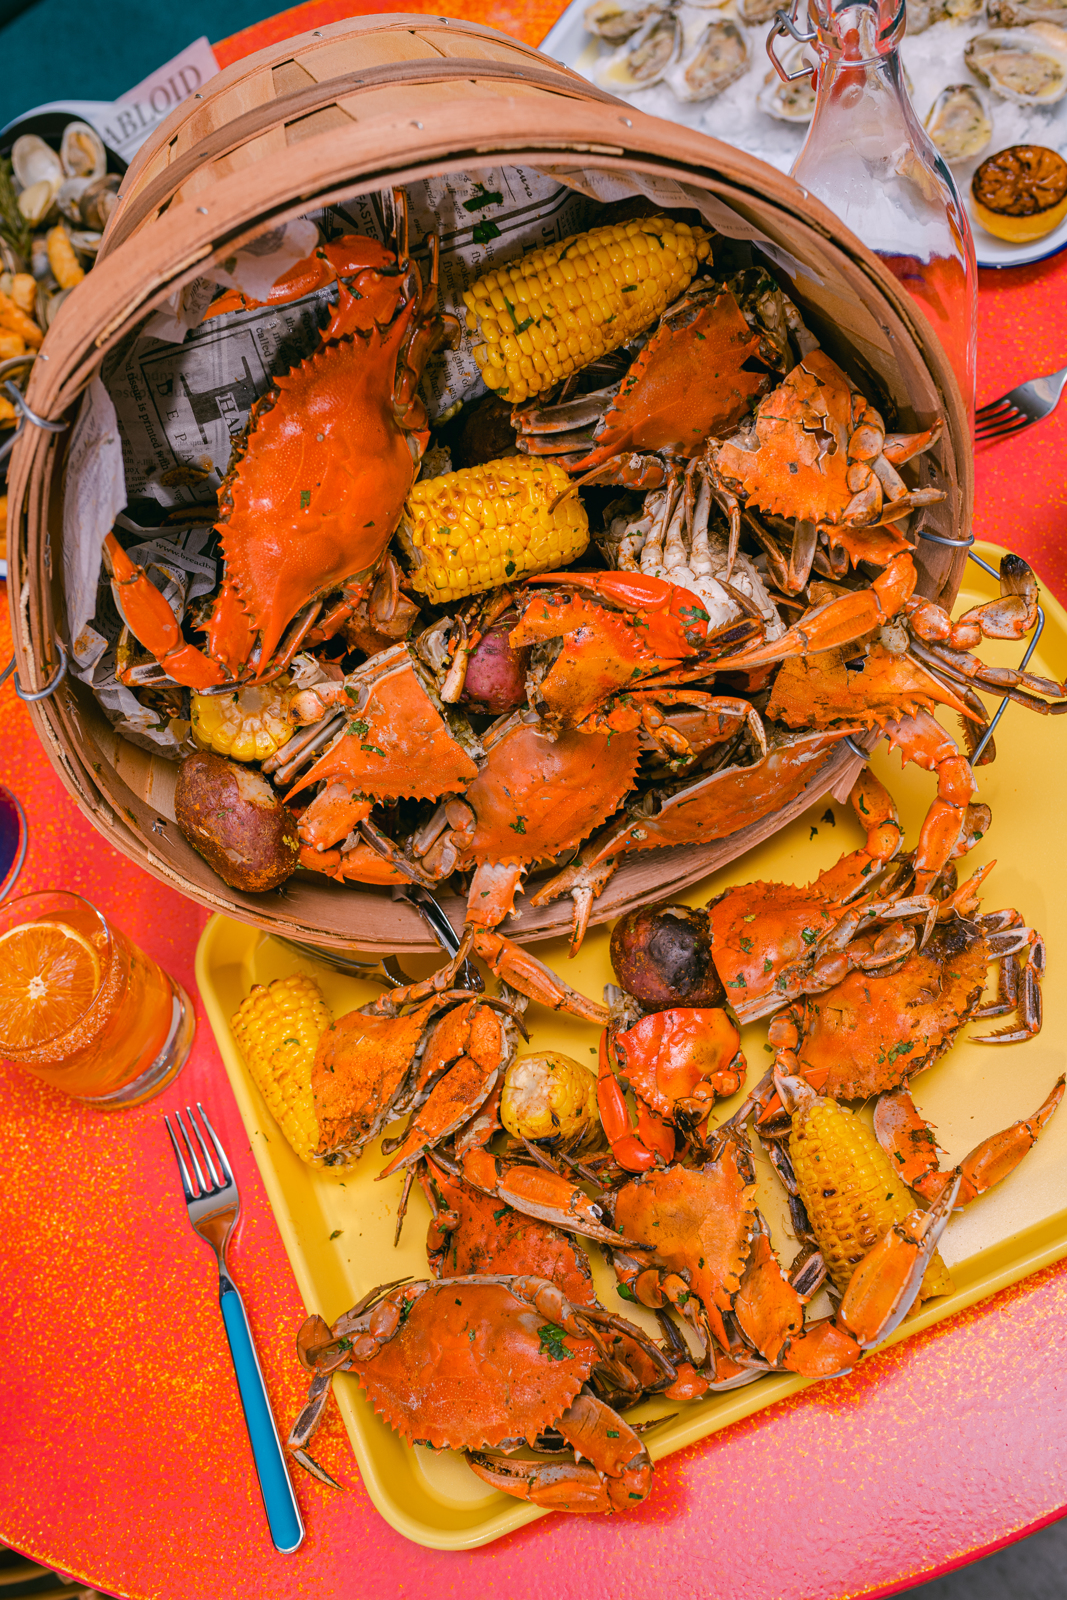 Food photography | A basket of crabs and corn on the cob | Bethesda, MD | Oceanside, CA